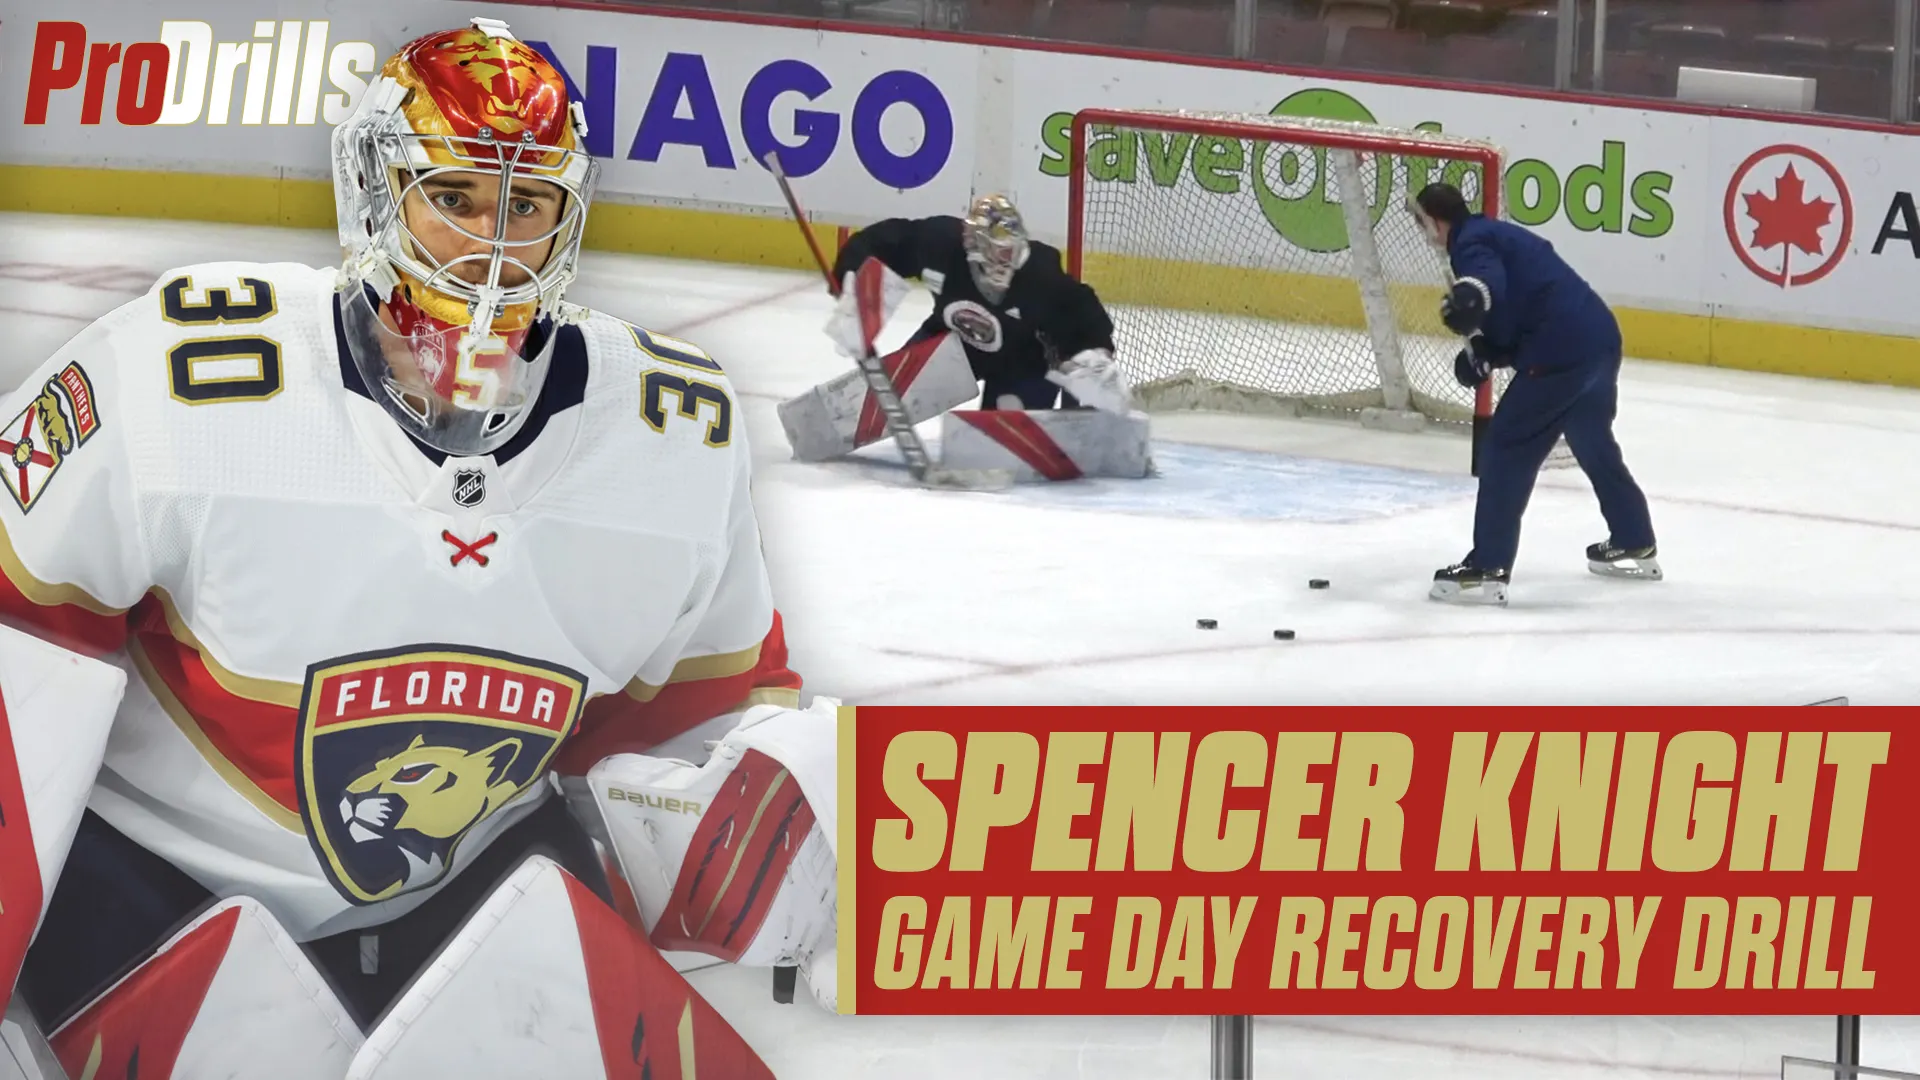 Spencer Knight Game Day Recovery Drill